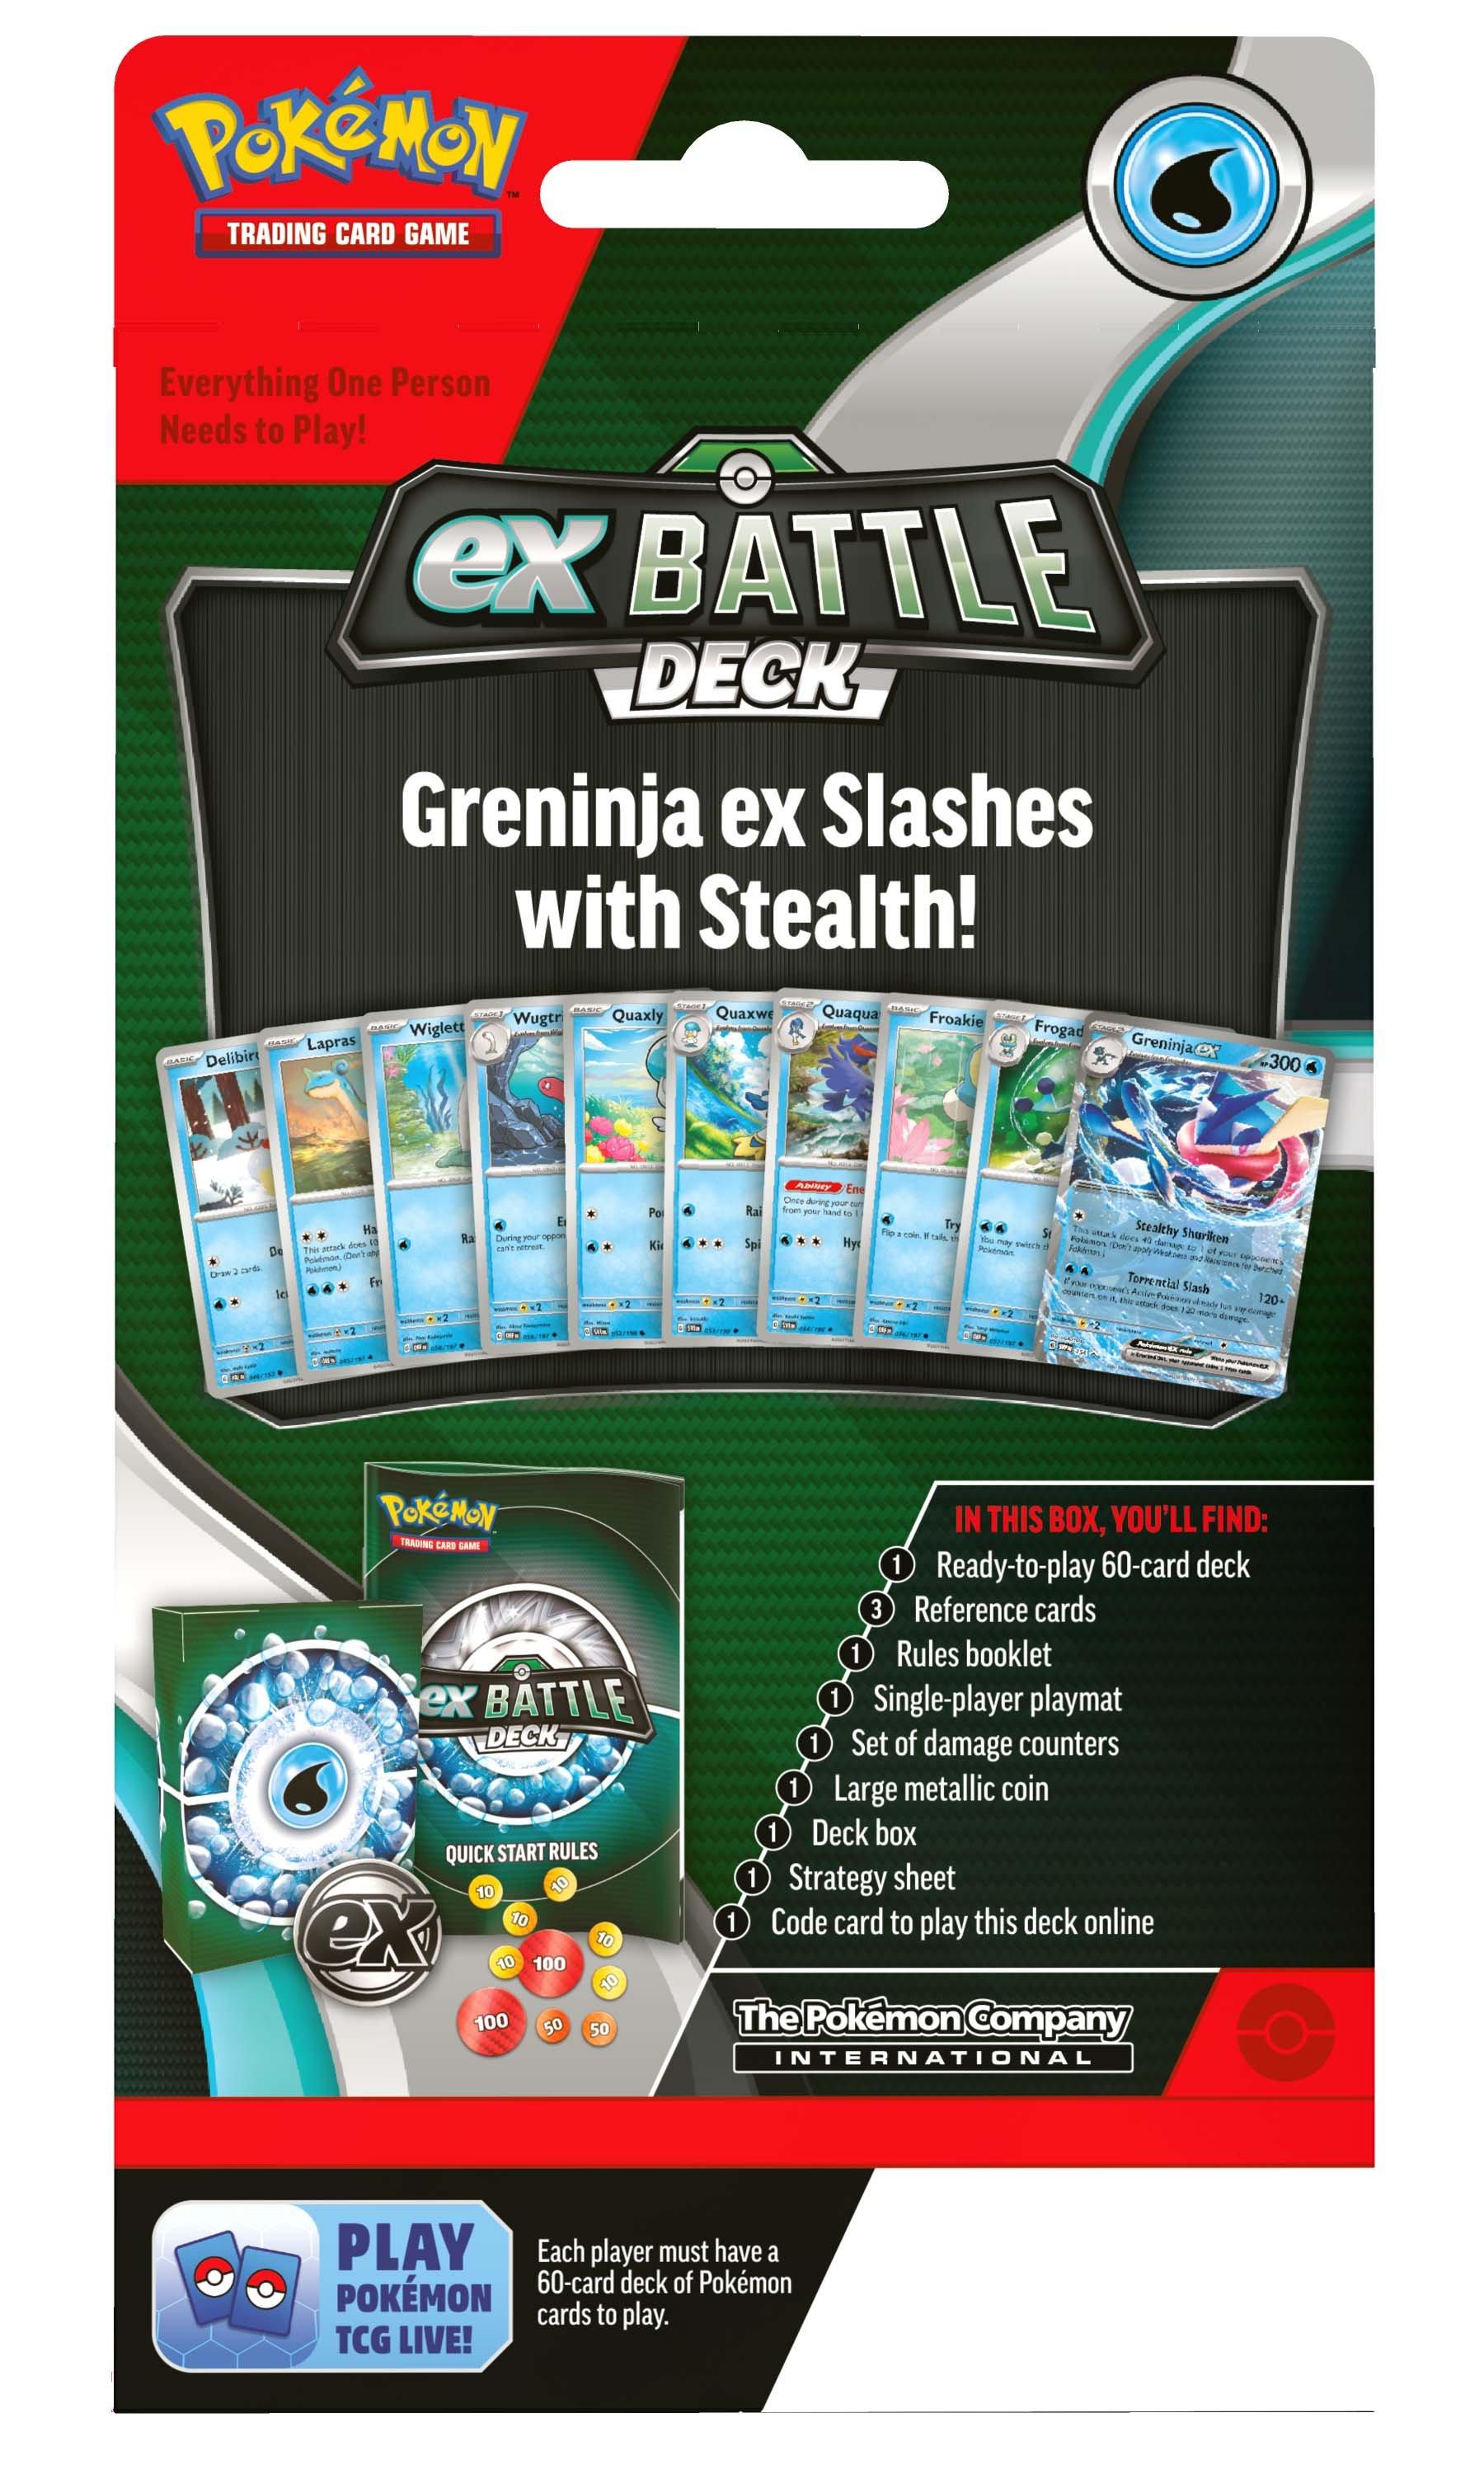 NEW POKEMON CARDS ARE HERE!* Opening Kangaskhan GX Collection Box from  GAMESTOP! 